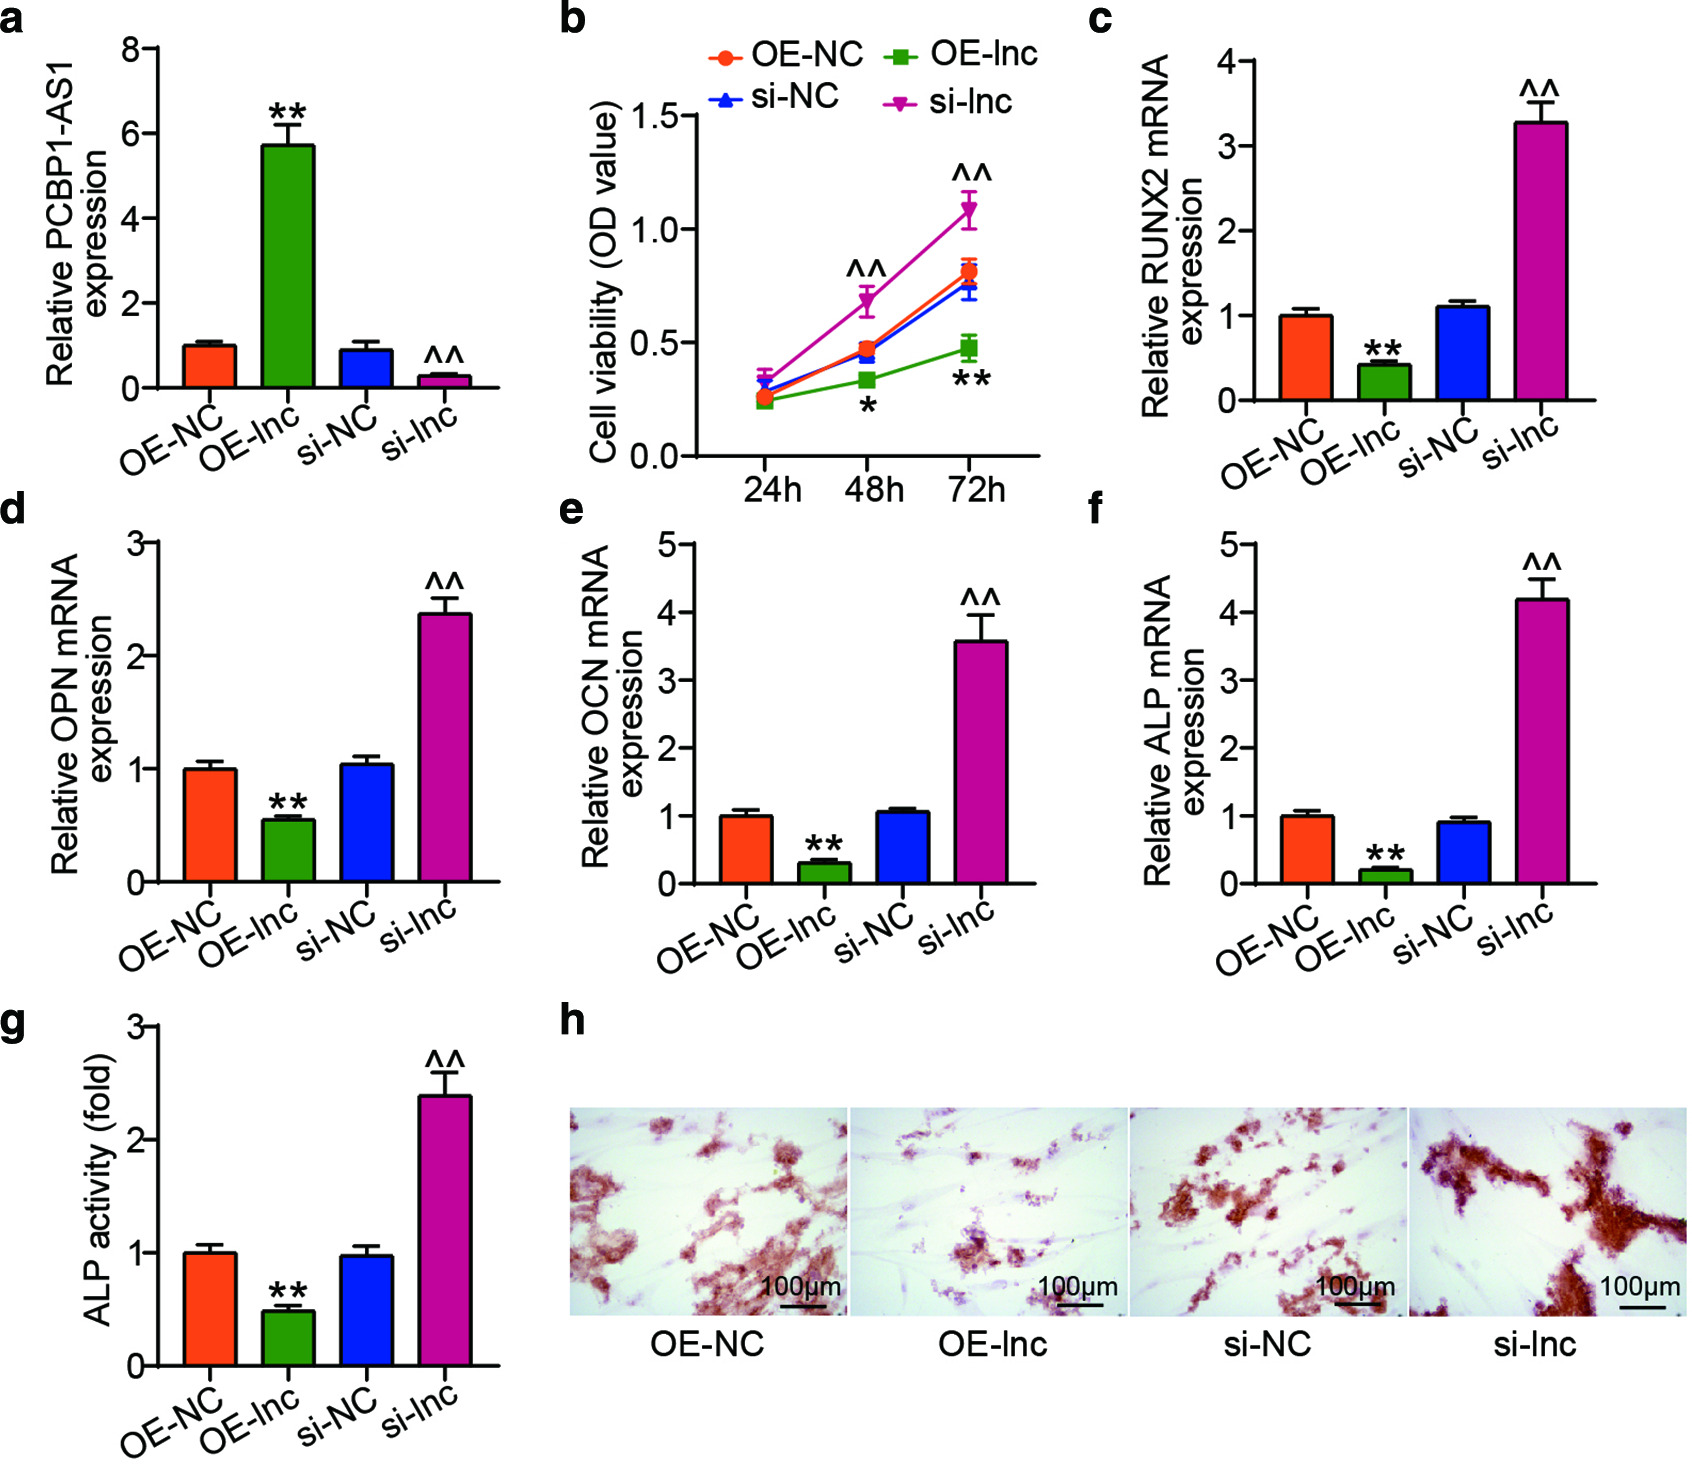 Fig. 2 
            PCBP1 Antisense RNA 1 (PCBP1-AS1) inhibited human bone marrow-derived mesenchymal stem cell (hBMSC) osteoblast differentiation. a) Transfection efficiency of PCBP1-AS1 overexpression vectors (OE-lnc) or si-PCBP1-AS1 (si-lnc) was recognized by quantitative real-time polymerase chain reaction (qRT-PCR). b) Cell proliferation of hBMSCs was measured by Cell Counting Kit-8 (CCK-8) assay. c) to f) qRT-PCR was used to determine the degree of osteogenesis-related gene expression for the genes Runt-related transcription factor 2 (RUNX2), osteopontin (OPN), osteocalcin (OCN), and alkaline phosphatase (ALP). g) ALP quantification identified ALP activity. h) Calcium deposits in hBMSCs were detected by Alizarin red staining. The data represent the mean (standard deviation). *p < 0.05, **p < 0.001 compared with empty vector (OE-NC), ^^p < 0.001 compared with negative control (si-NC); calculated using one-way analysis of variance. mRNA, messenger RNA; OD, optical density.
          